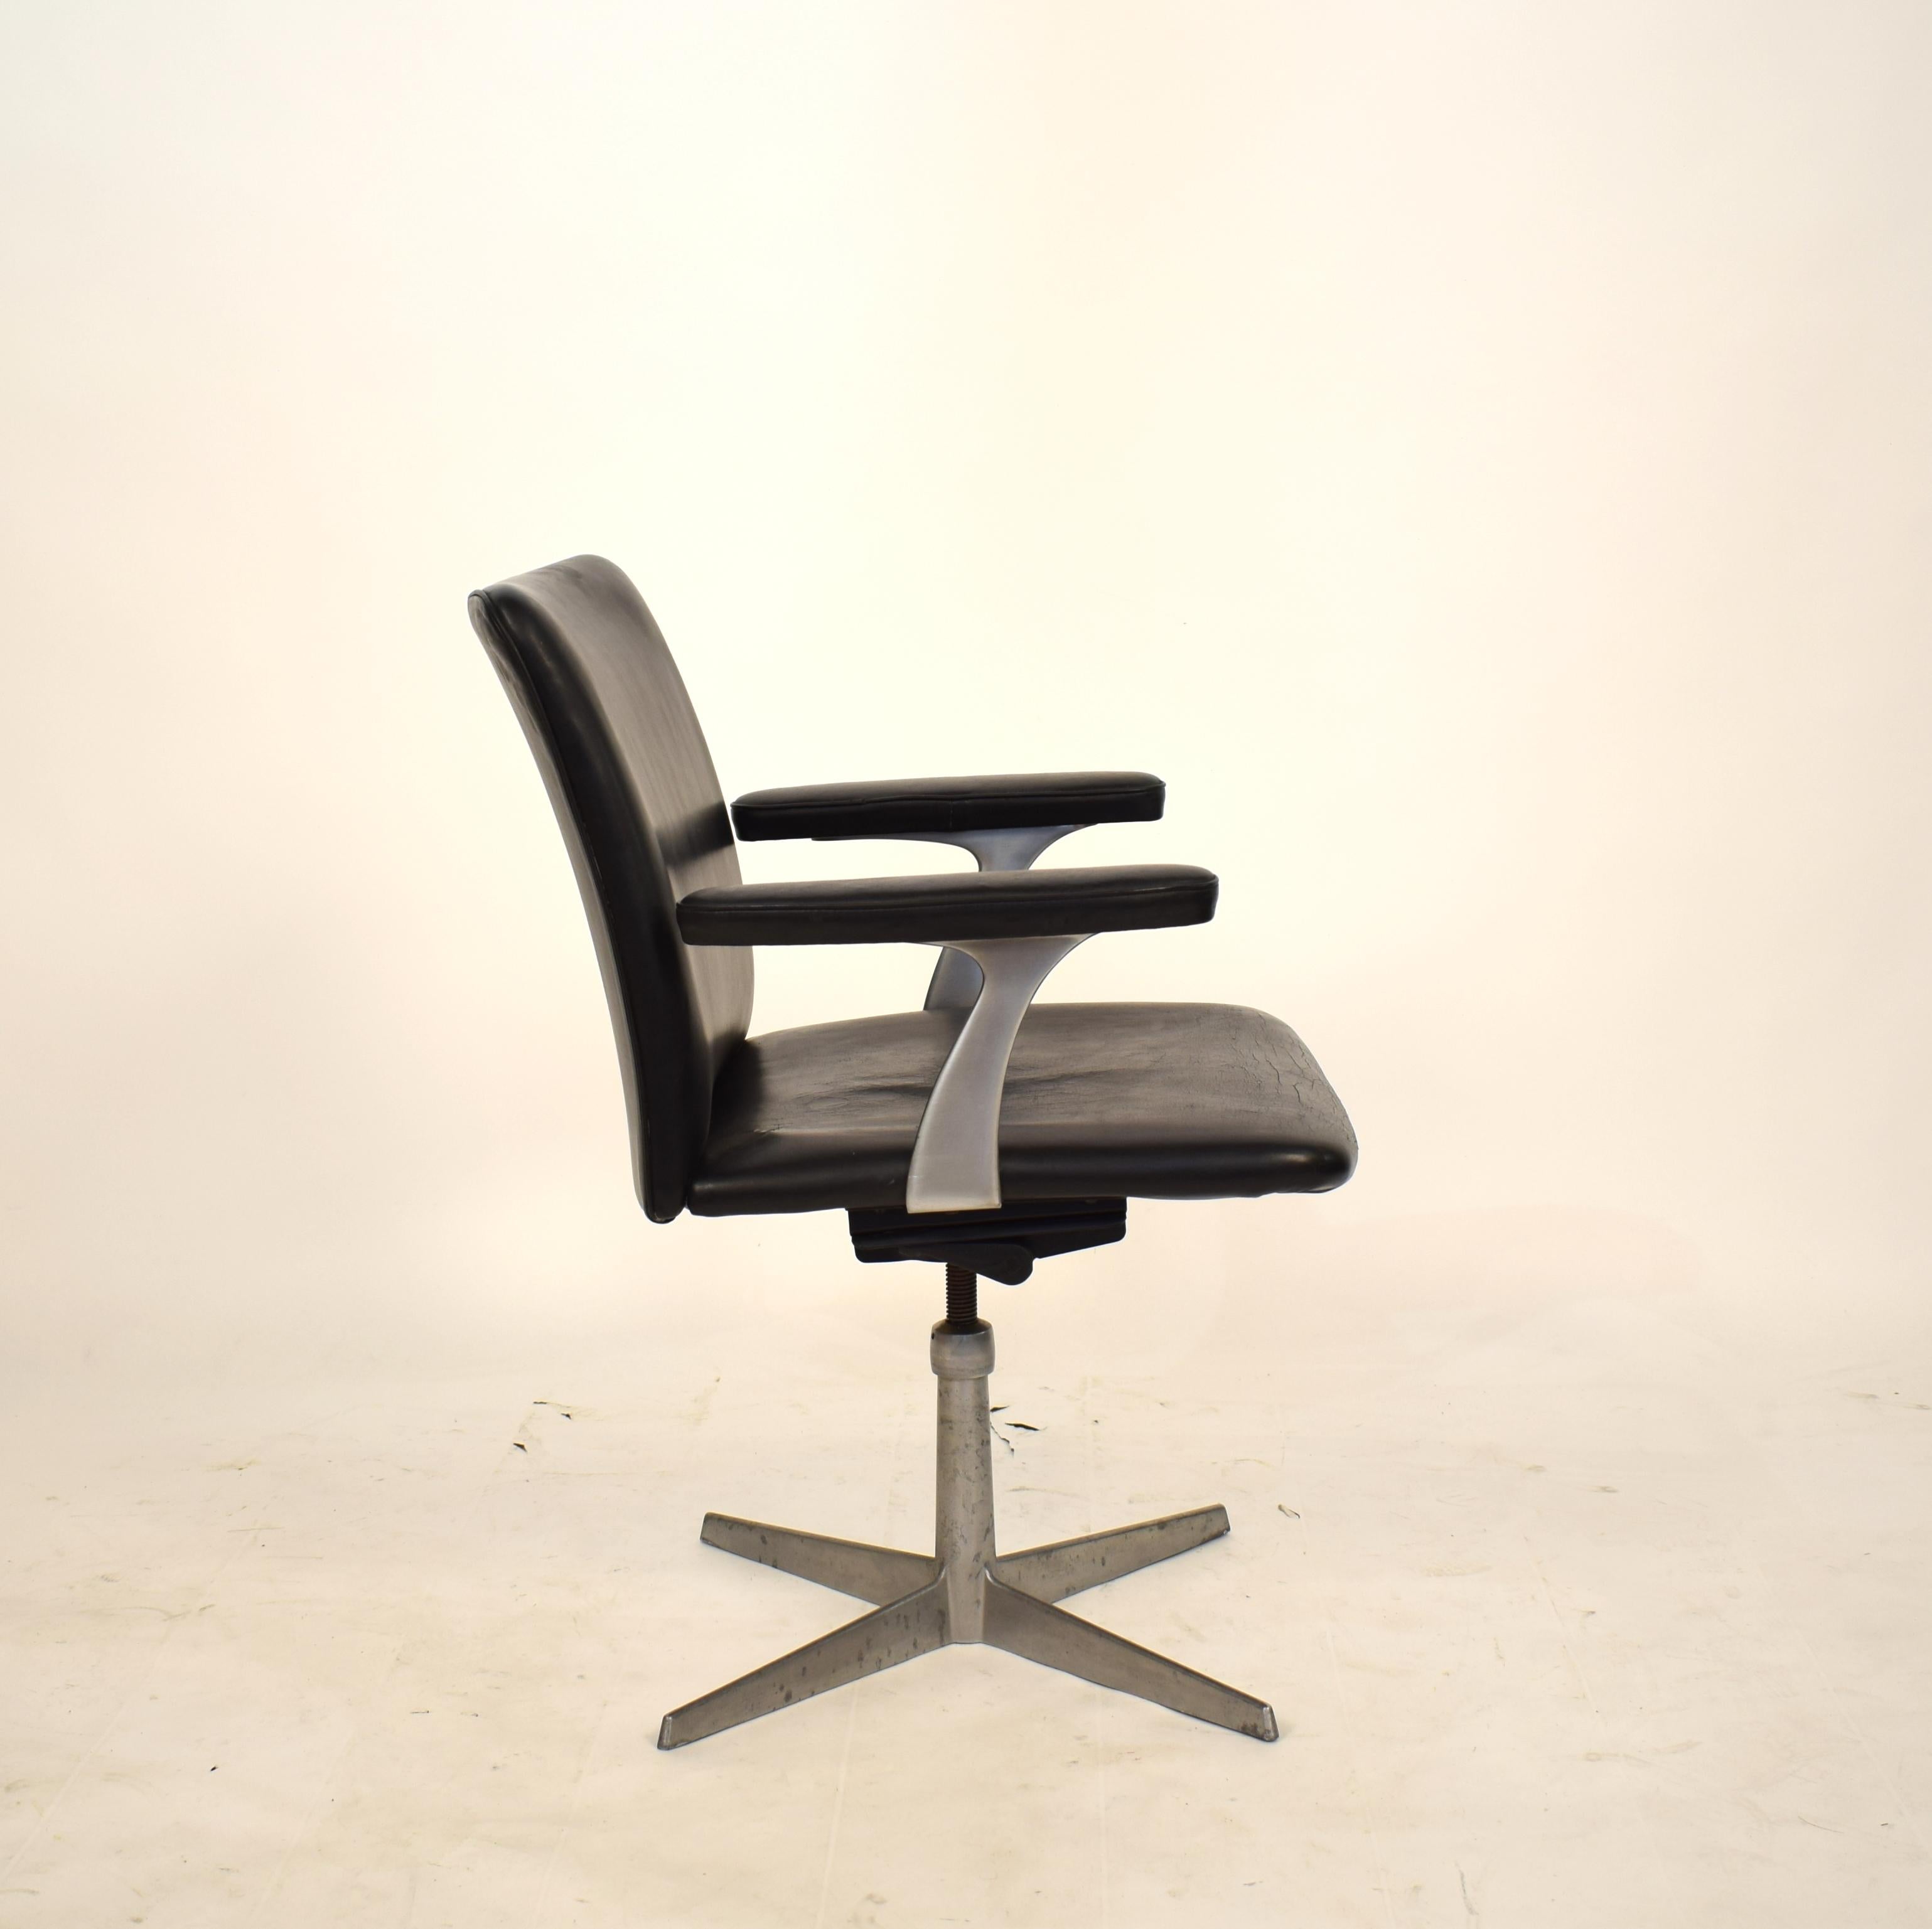 Midcentury Scandinavian Armchair in Black Leather and Aluminum, circa 1970 For Sale 6